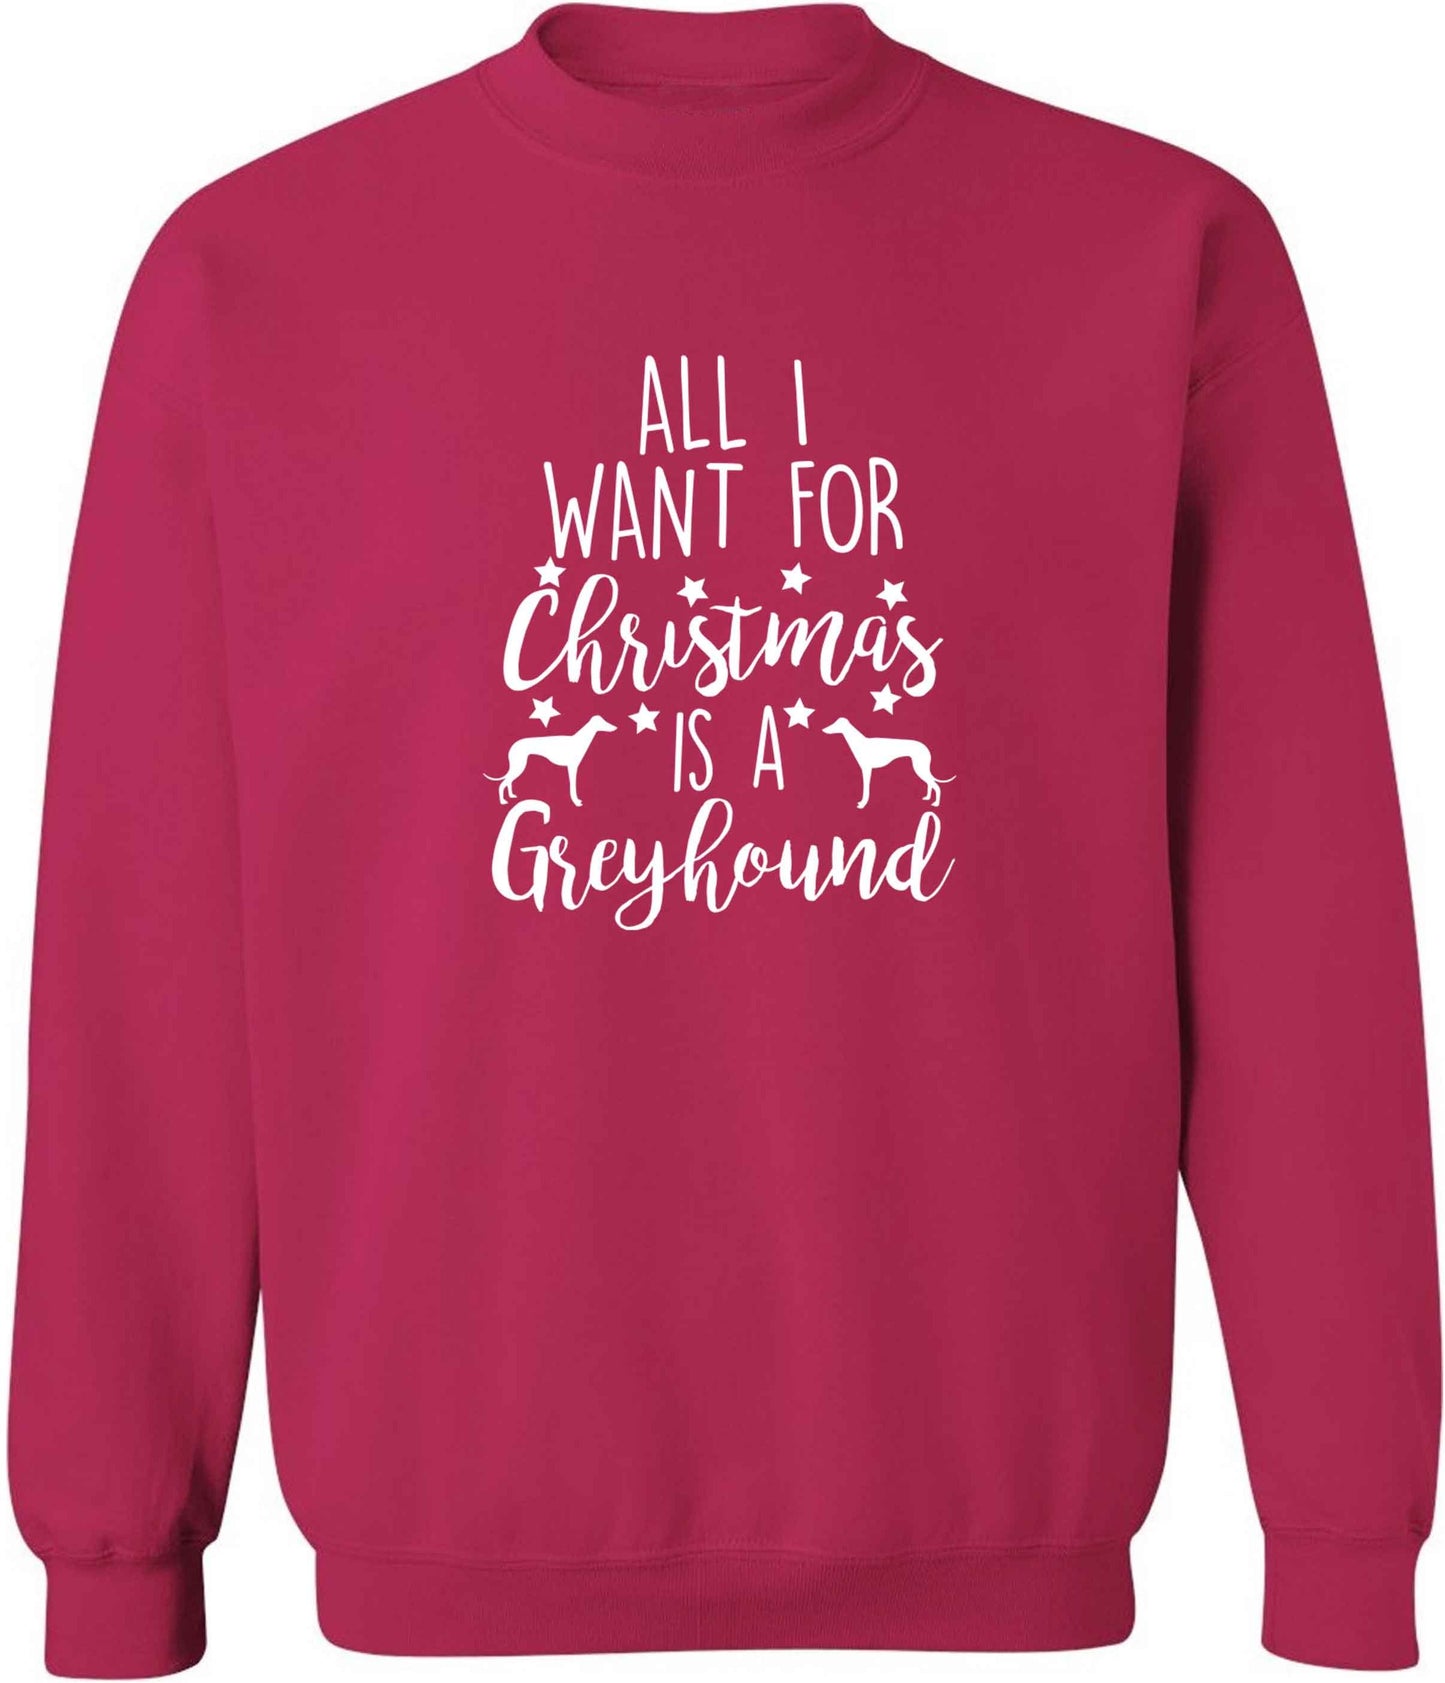 All I want for Christmas is a greyhound adult's unisex pink sweater 2XL